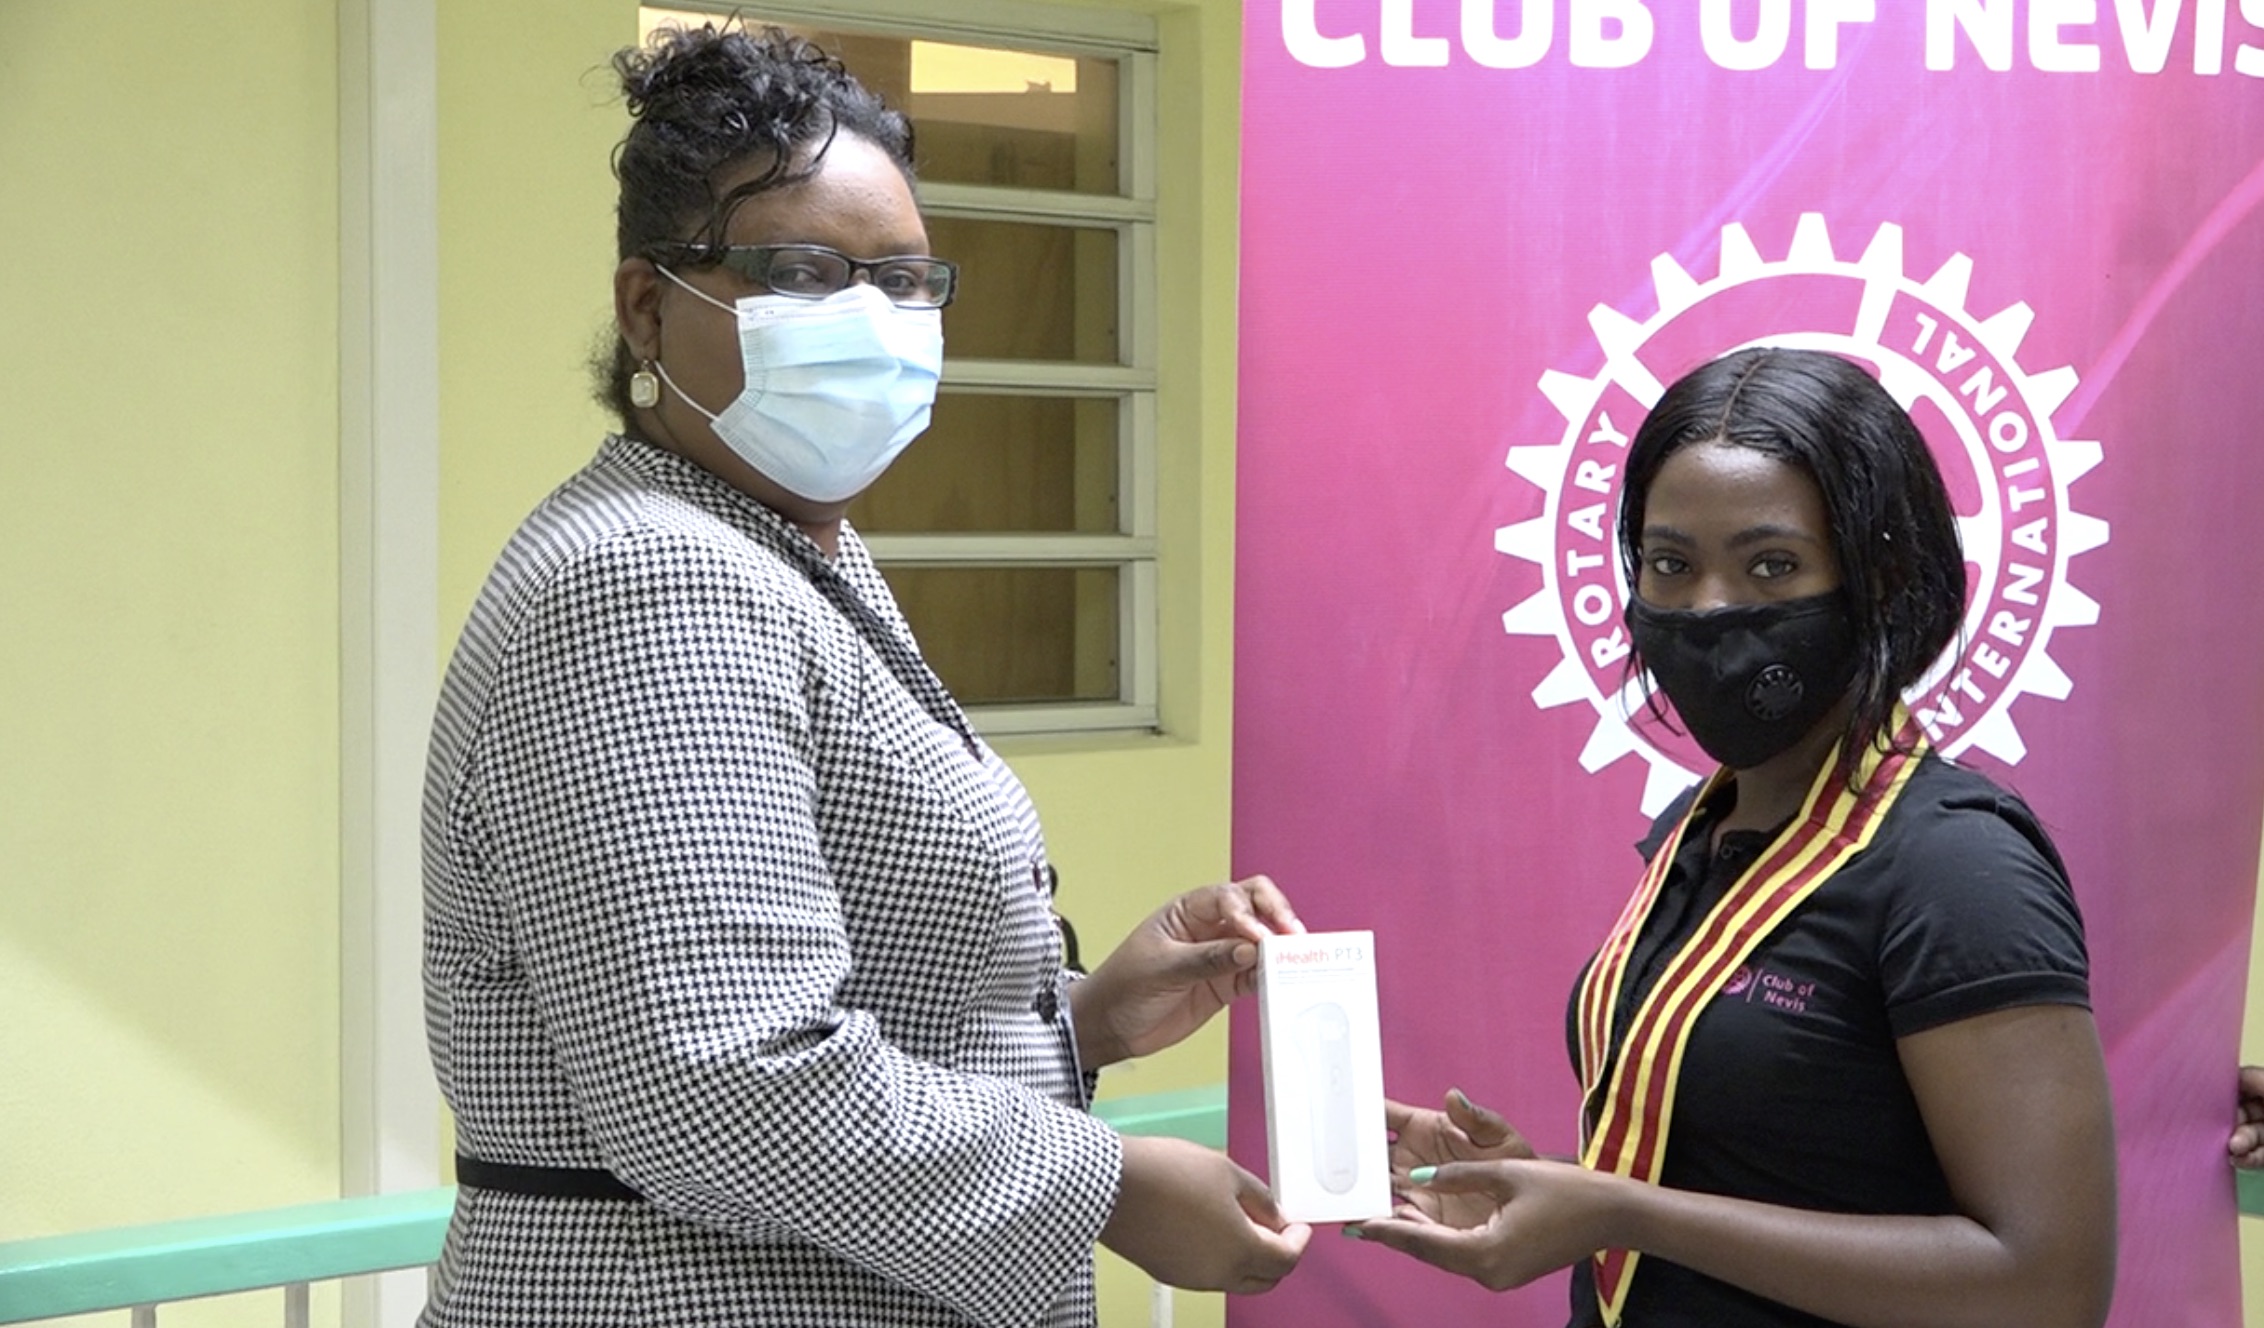 Ms. Zahnela Claxton, Principal Education Officer in the Department of Education receiving a gift of iHealth PT3 Infrared No-Touch Digital Forehead Thermometers from Ms. Asieah Smithen, Acting President of the Rotaract Club of Nevis on behalf of the club on February 03, 2021, at the Department of Education’s office in Marion Heights